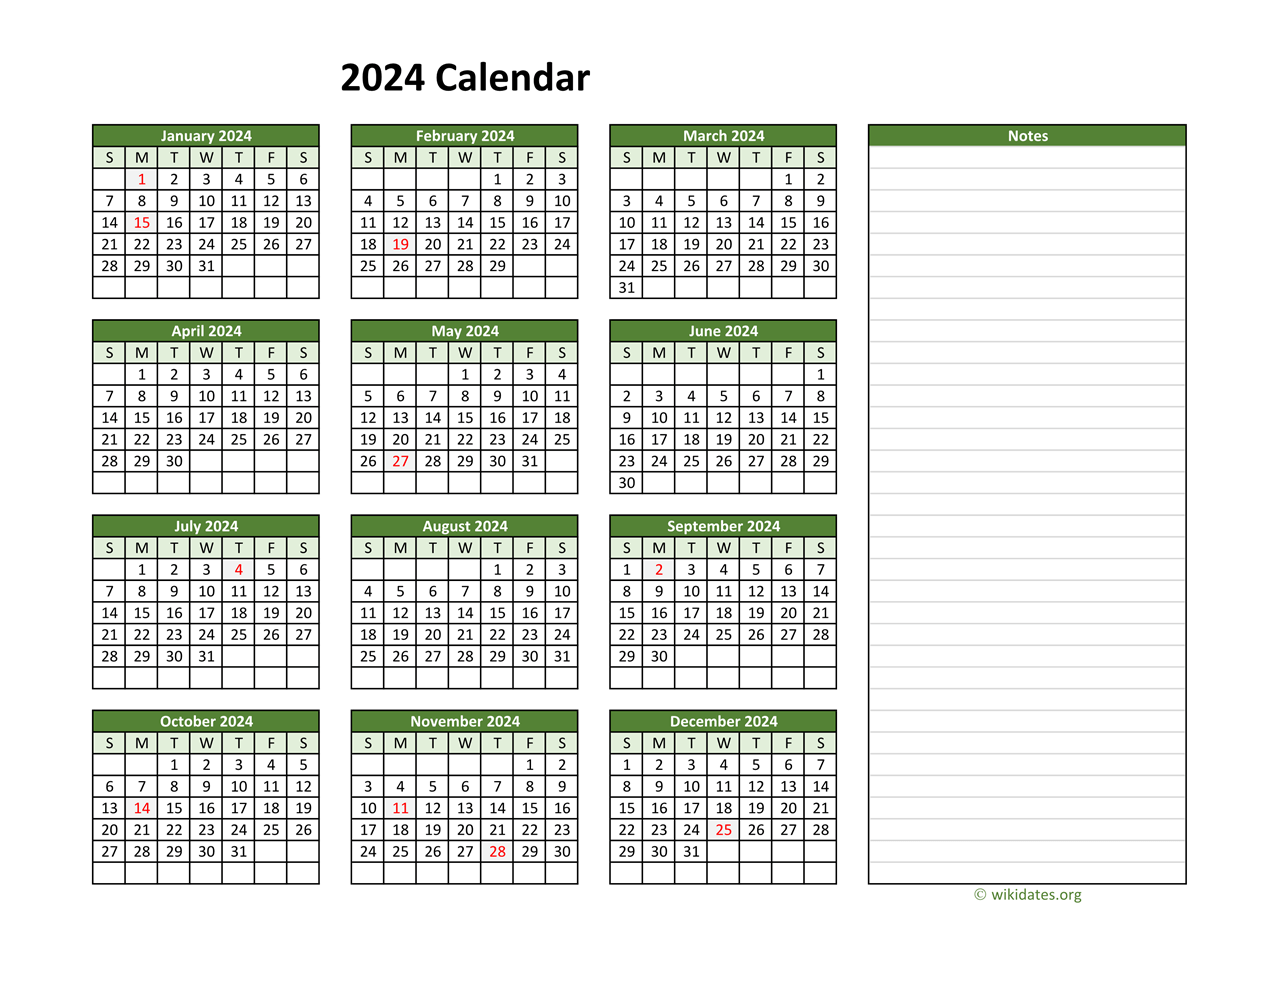 Yearly Printable 2024 Calendar With Notes | Wikidates for Printable Yearly Calendar 2024 With Notes